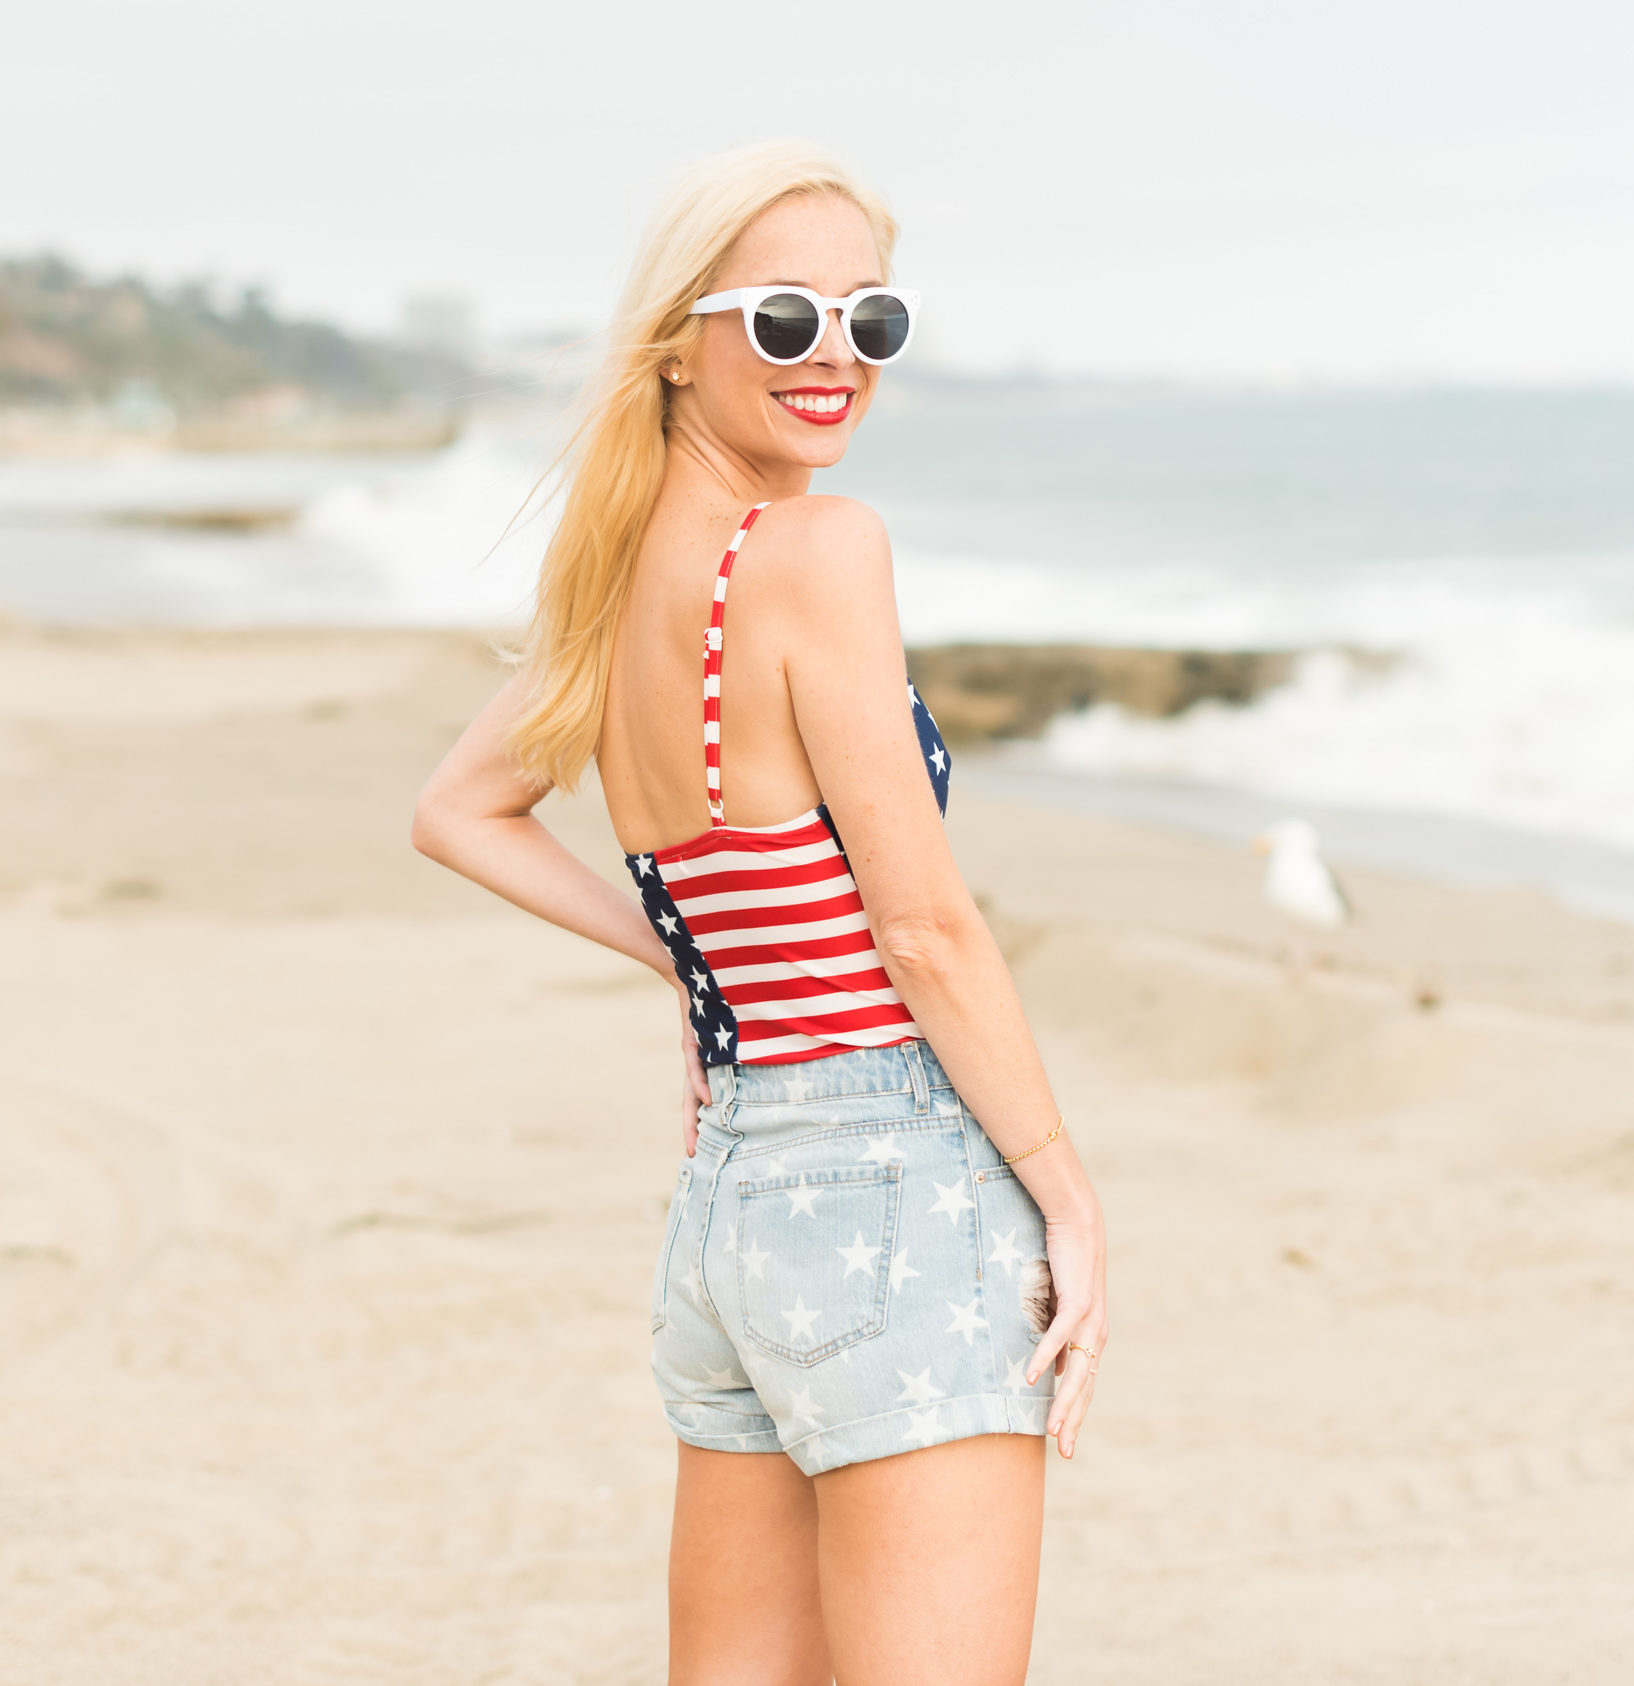 Fourth of July Outfit Inspiration and Decoration Ideas for the Hostess